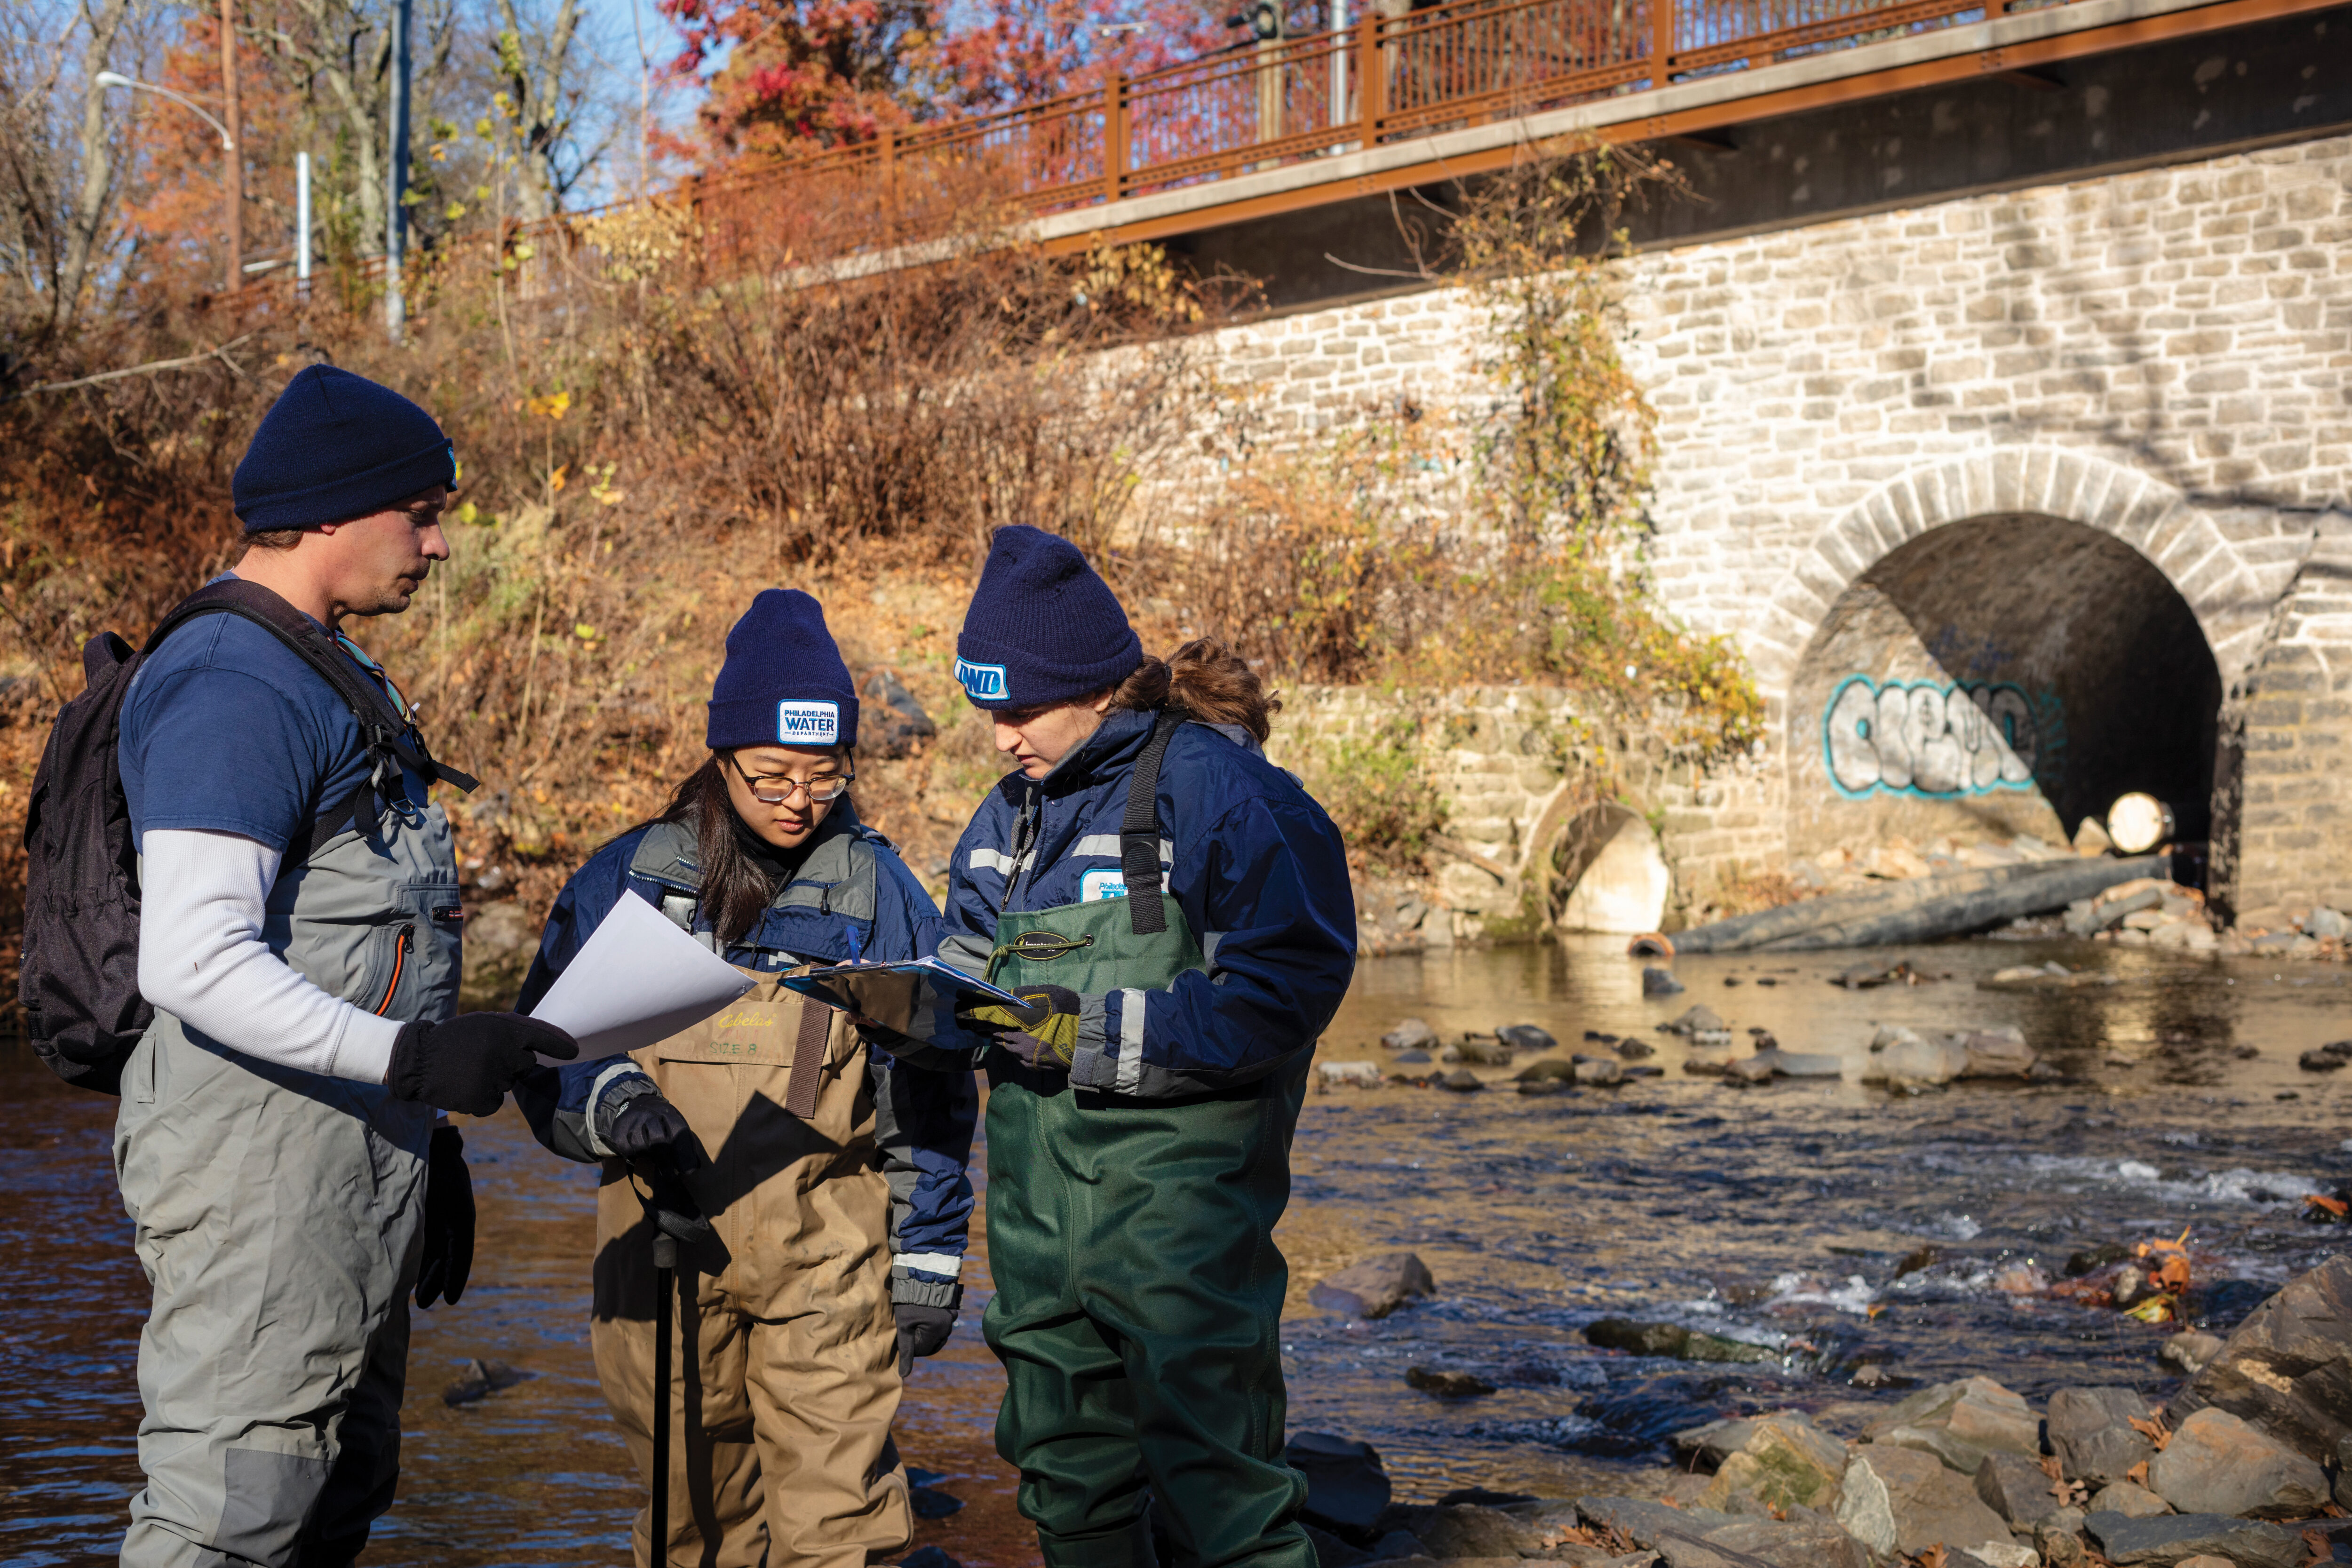 Three PWD employees in dark blue shirts or jackets and winter hats with PWD logos on them, and chest-high waders in different colors, stand in Pennypack Creek, in front of an arched stone bridge to their right and fall foliage on the opposite bank seen to the left, looking at a clipboard during an assessment of the stream.